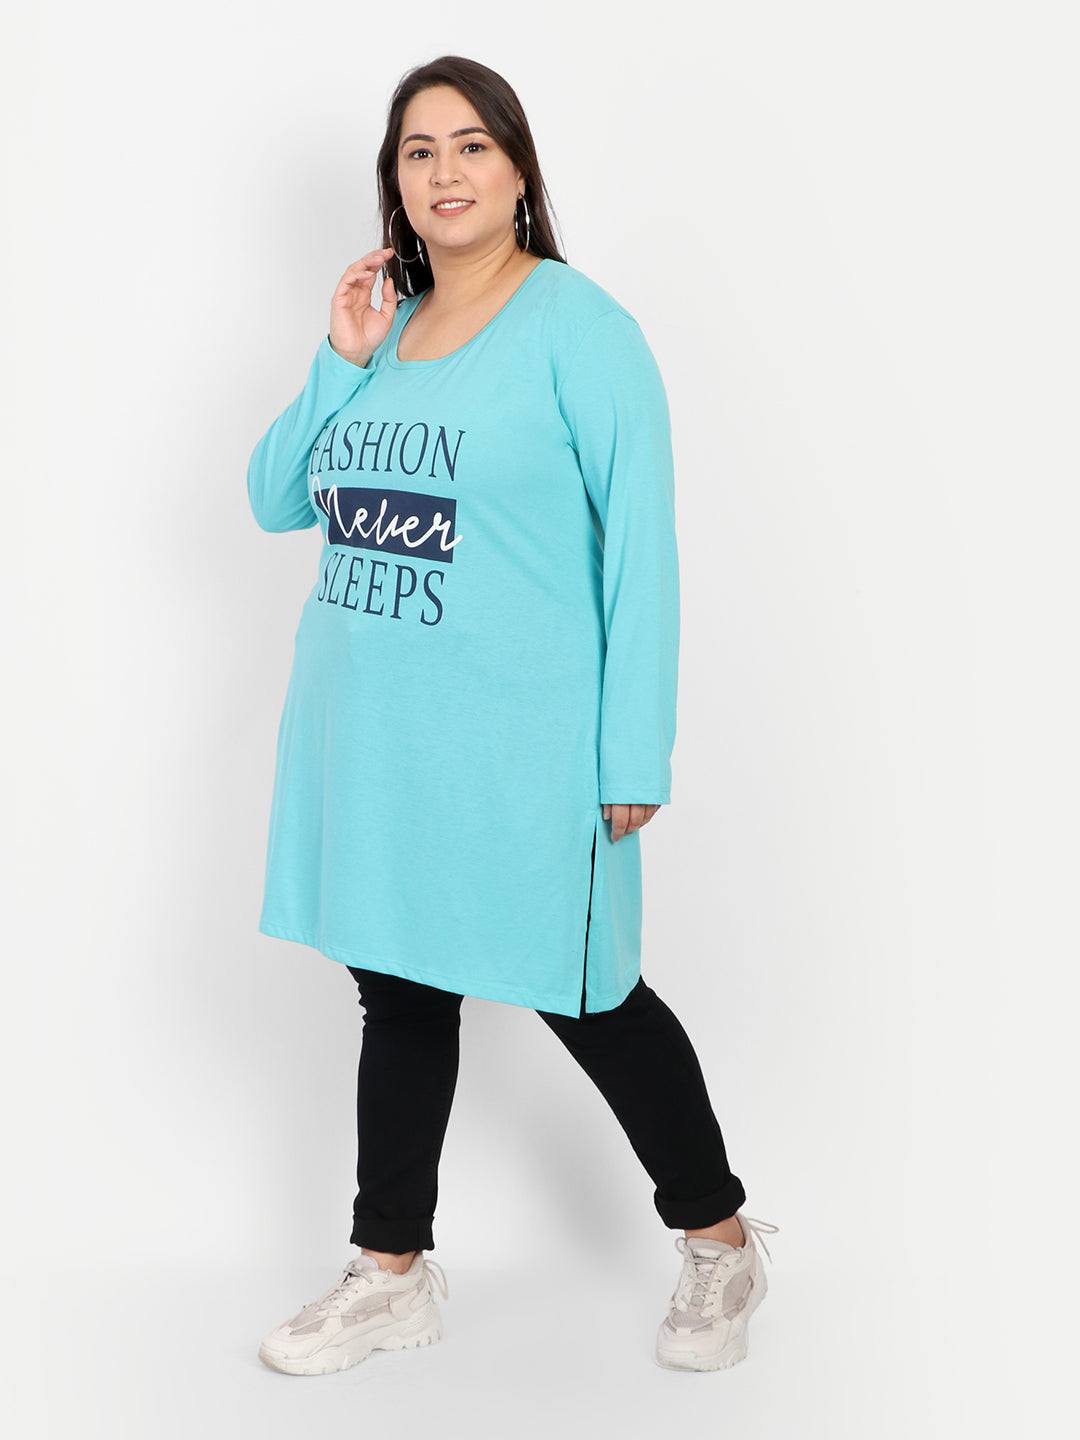 Cotton Long Top for Women Plus Size - Full Sleeve - Turquoise